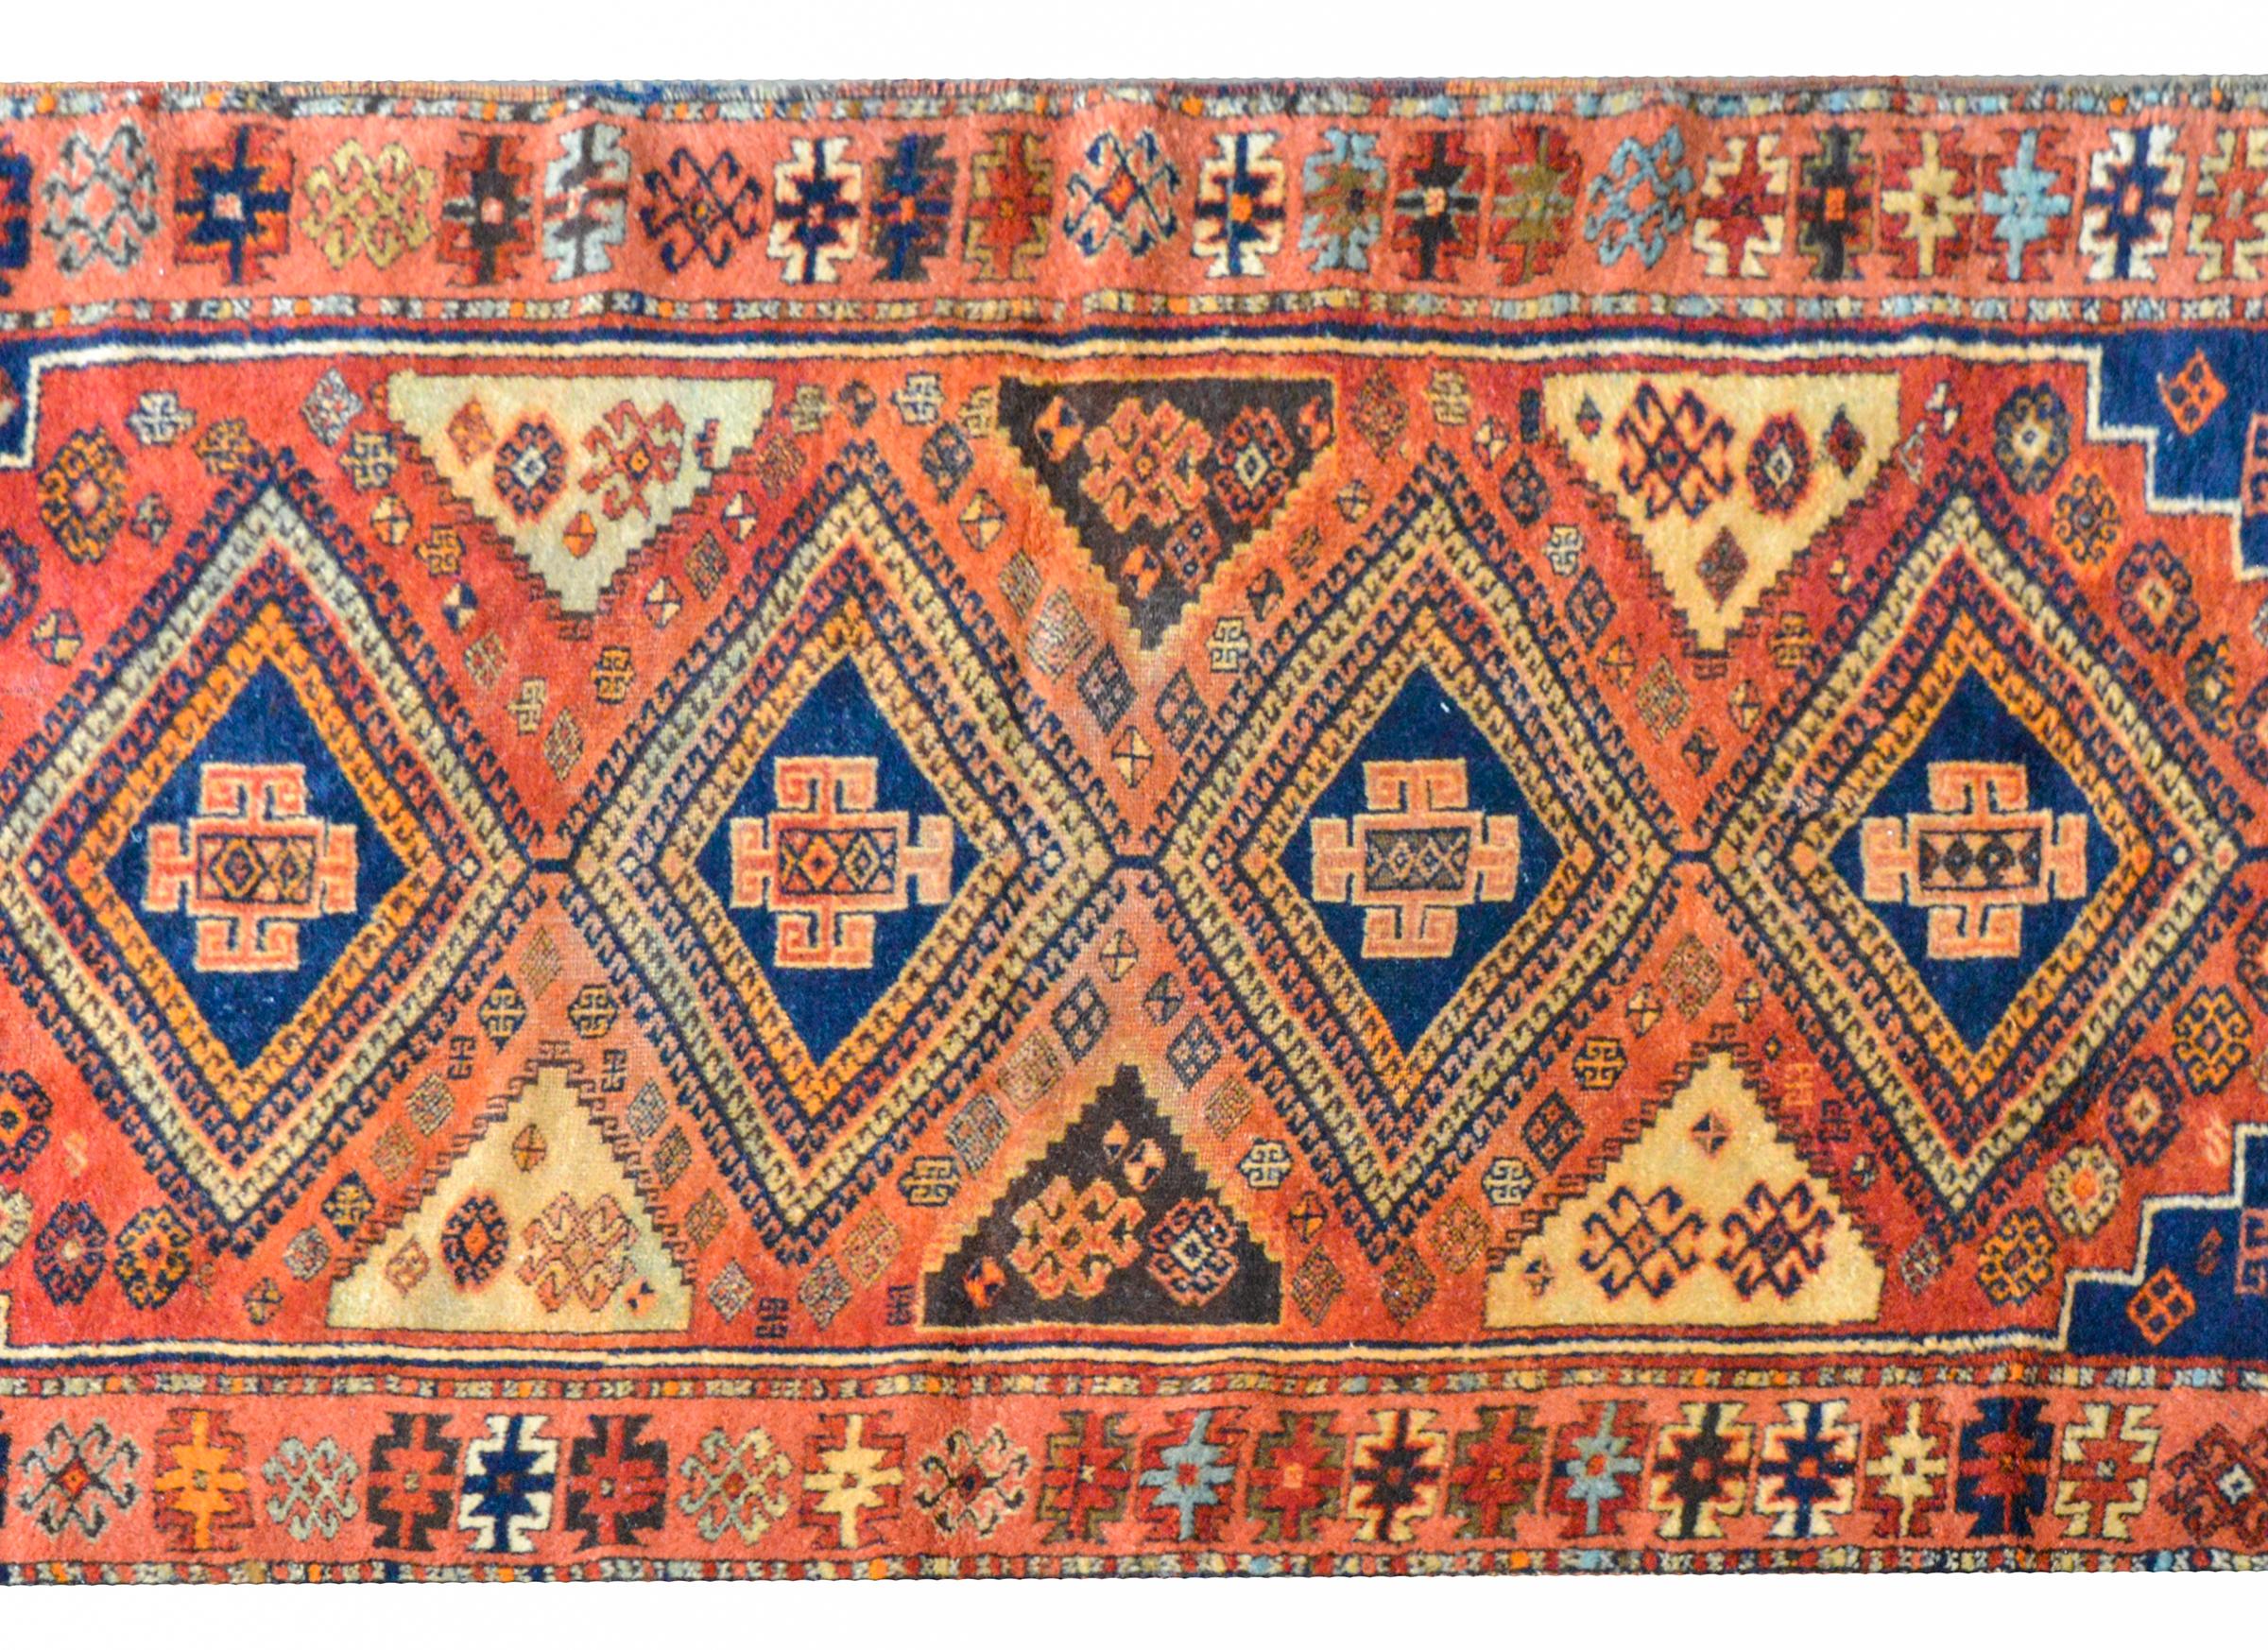 A wonderful and bold early 20th century Anatolian Turkish runner with four large diamond medallions, each woven with a geometric pattern with alternating colored stripes and set against a field of stylized flowers against a crimson field. The border